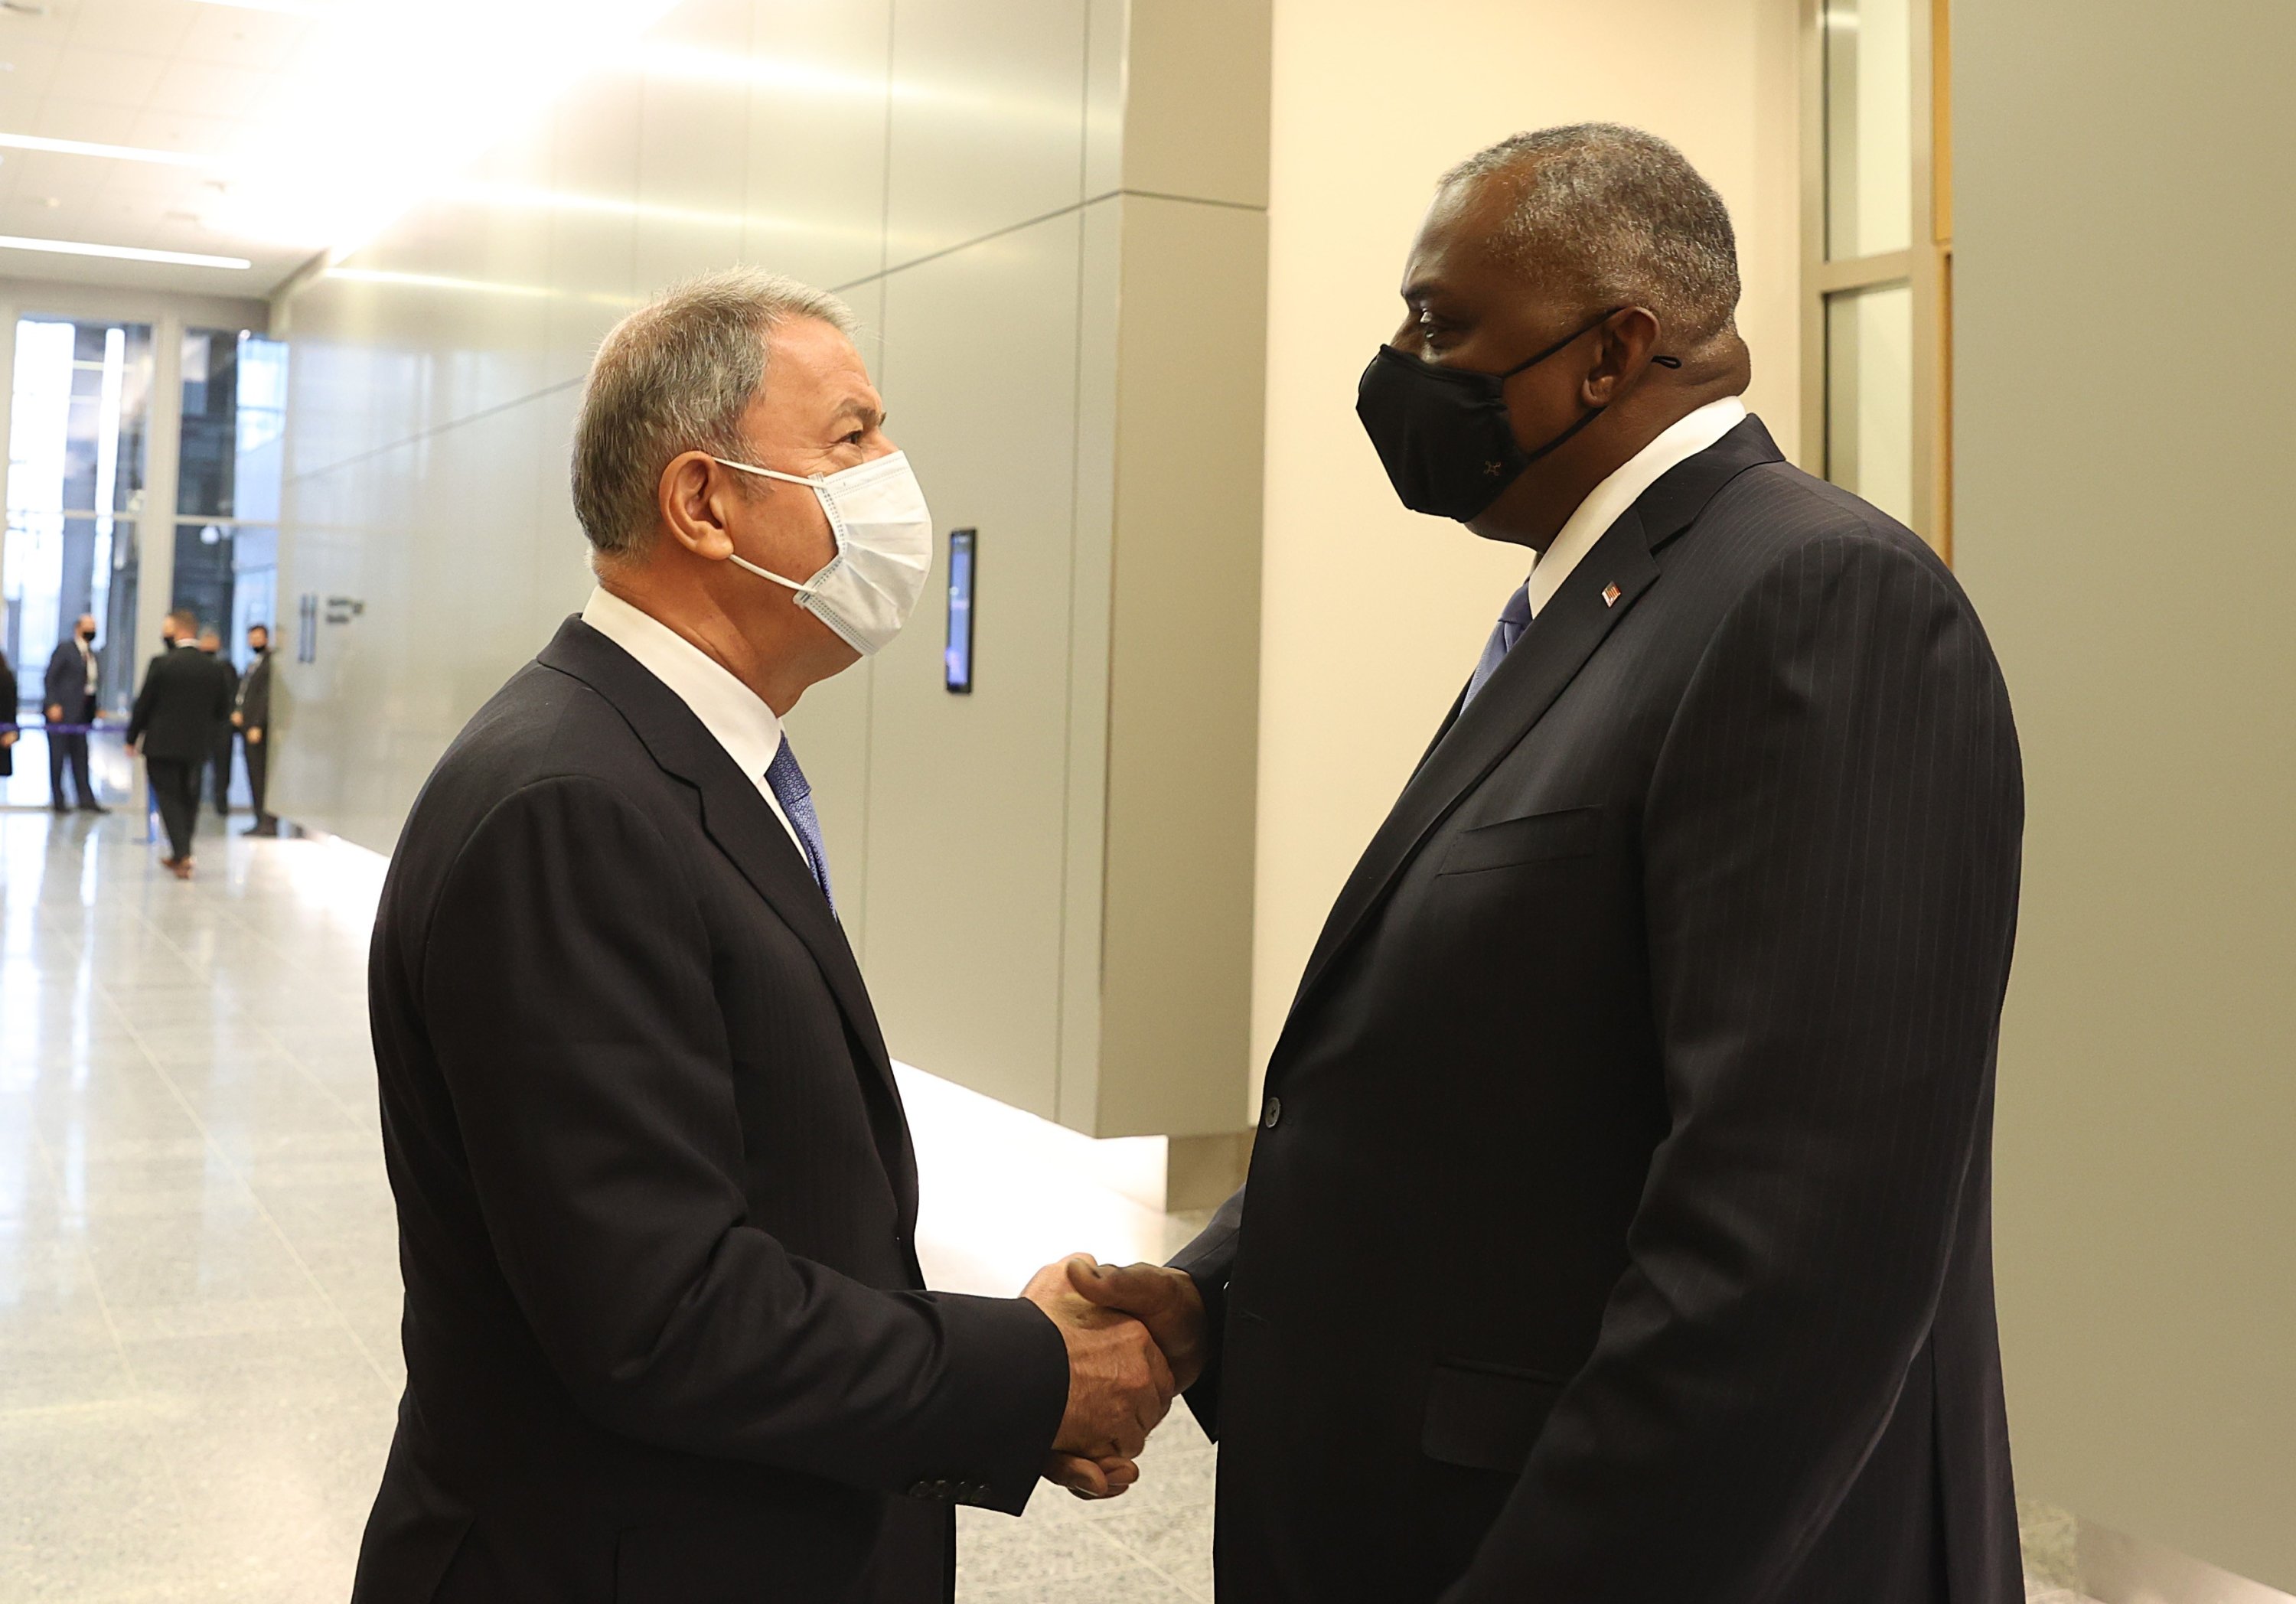 Defense Minister Akar and his U.S. counterpart Lloyd Austin shake hands on the sidelines of the NATO Ministers of Defense meeting in Brussels, Oct. 21, 2021 (IHA Photo)